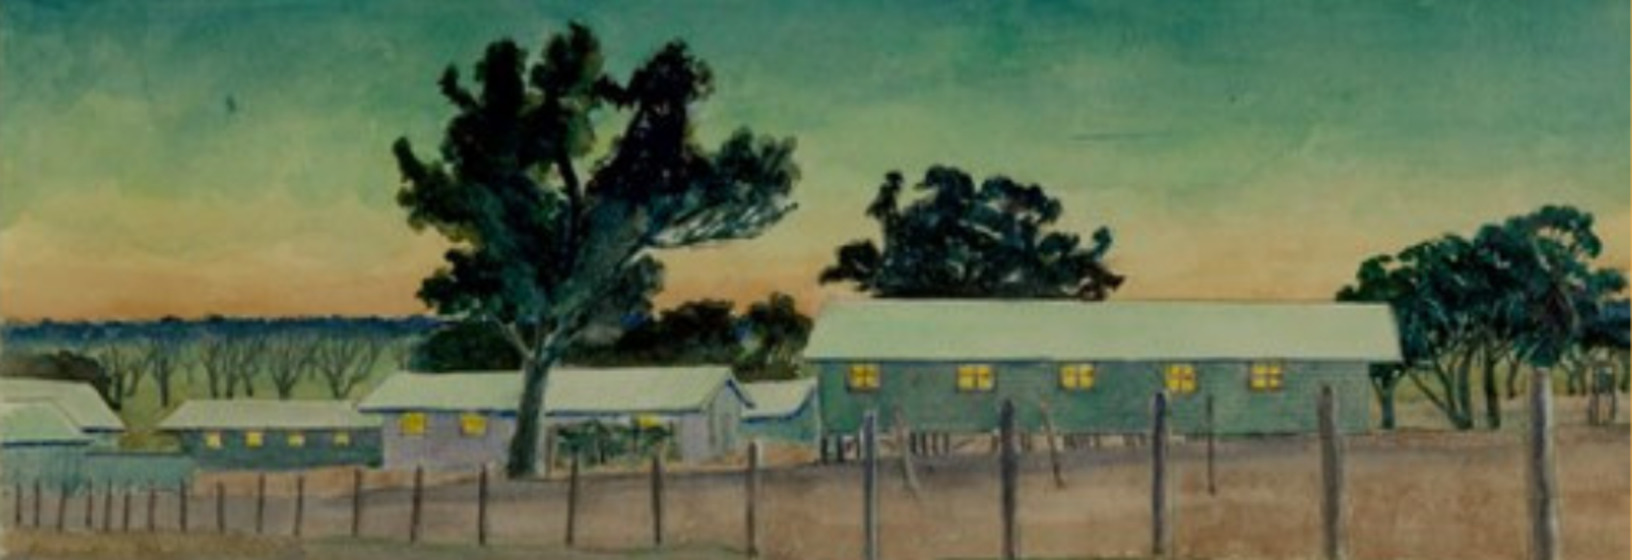 Camp 2 Tatura showing cabins in the rural setting with eucalyptus trees, the moon in a twilight sky